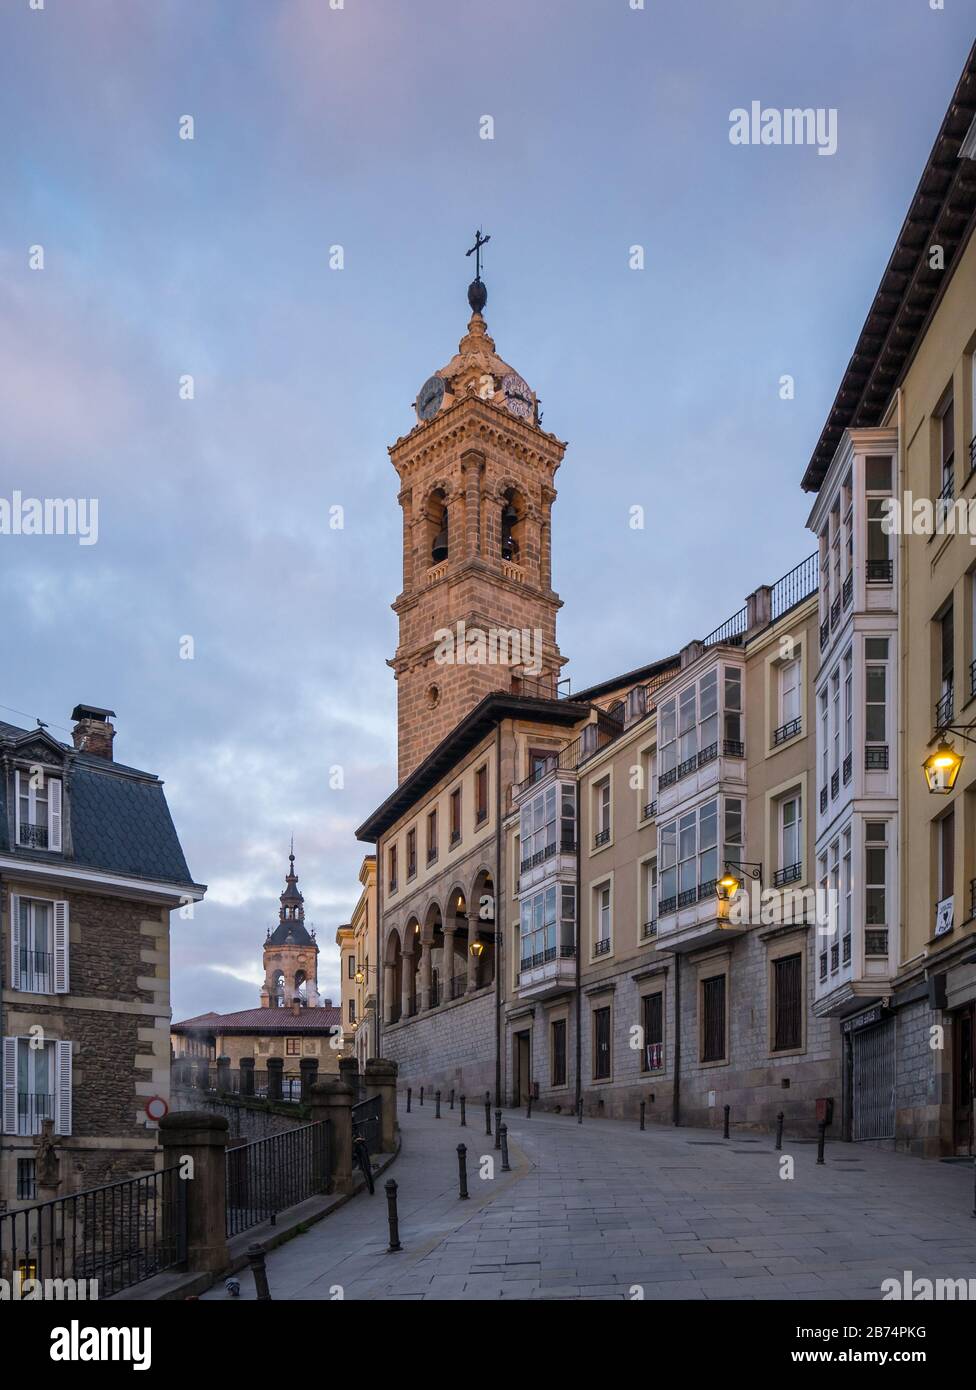 View of the tower of St. Vincent Church and Cuesta de San Vicente Street, in the back the tower of St. Michael Church in Vitoria-Gasteiz, Spain Stock Photo